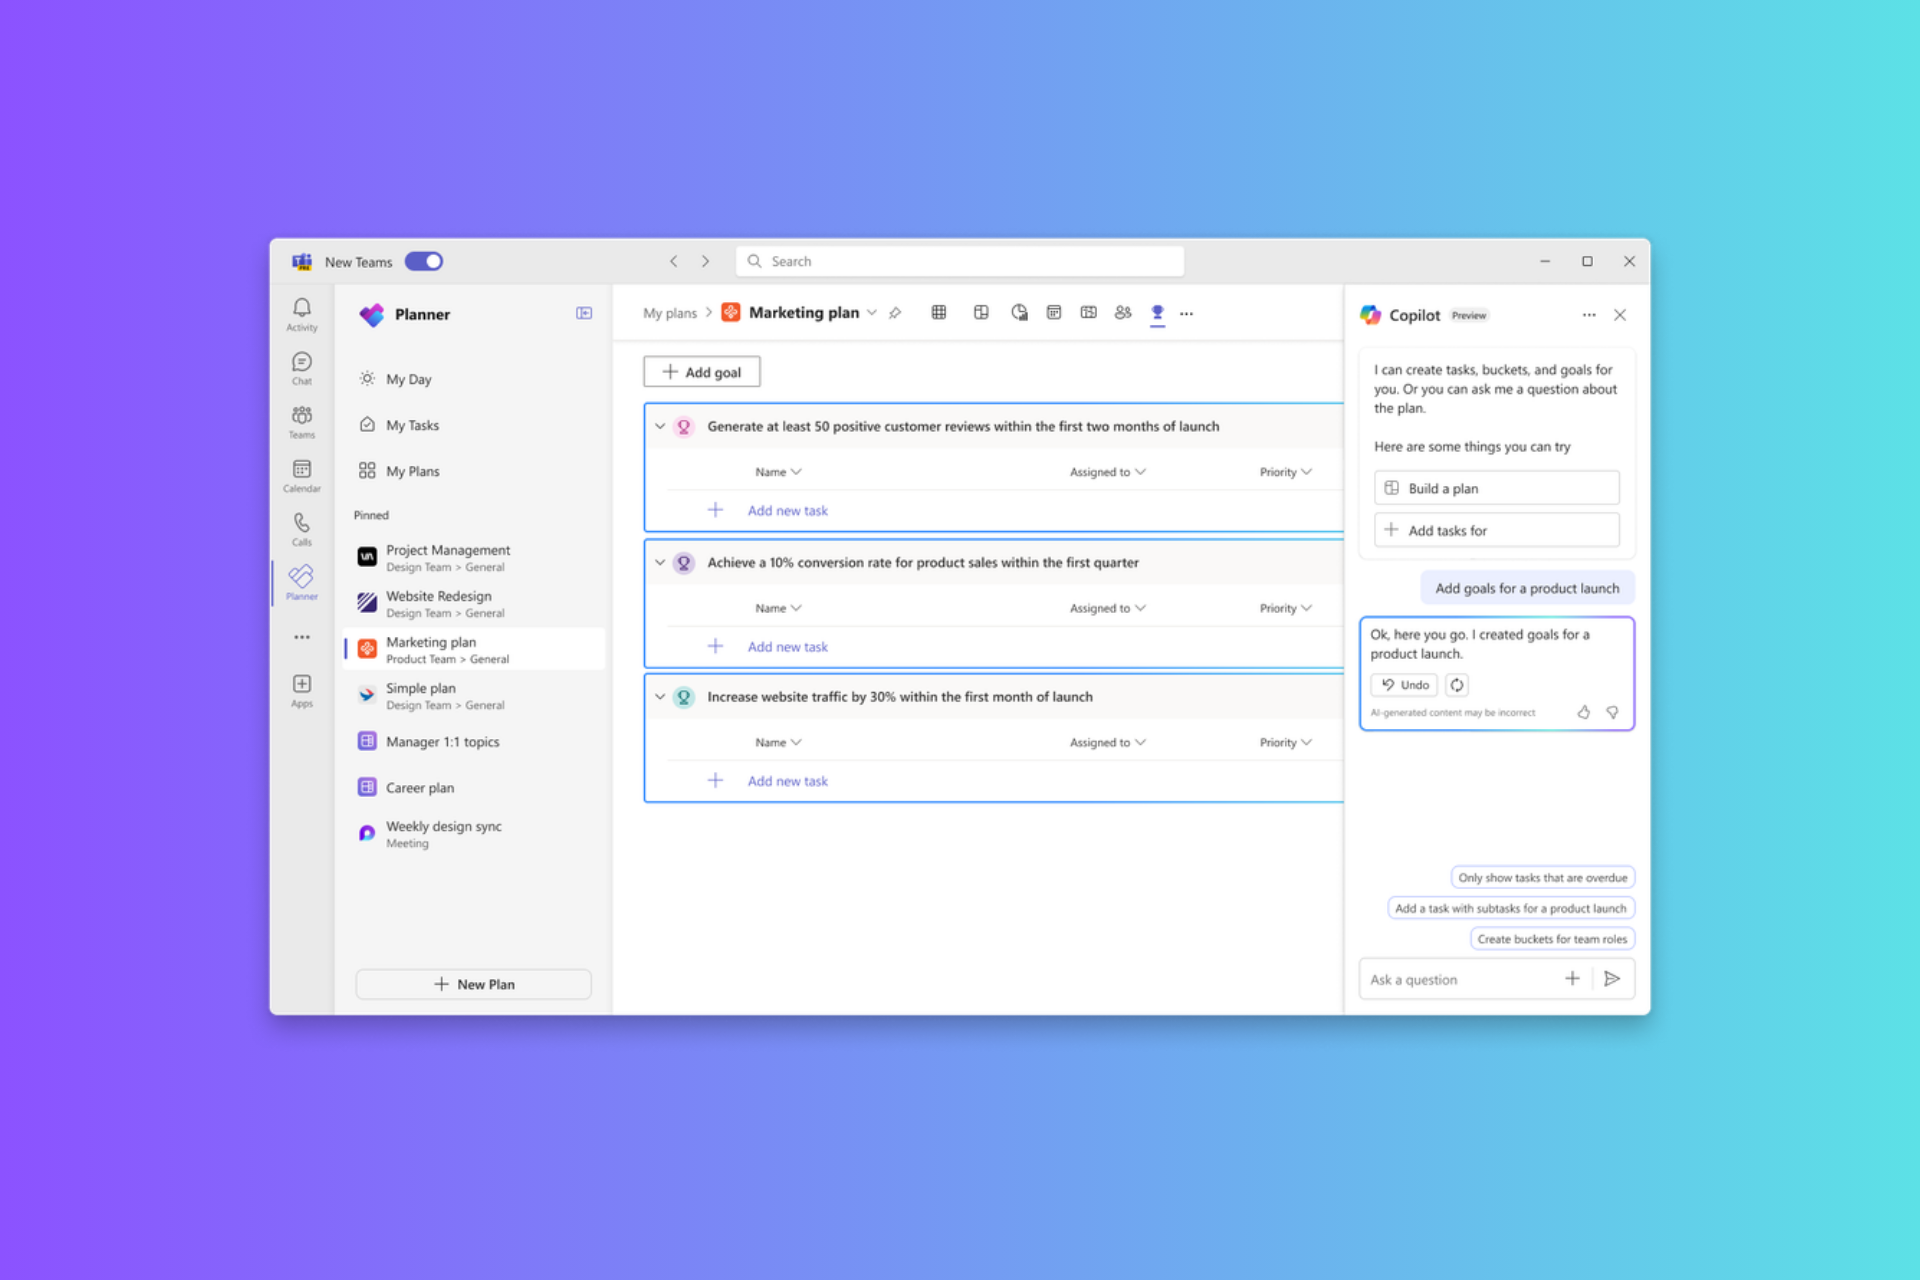 Microsoft Planner in Teams now comes with Copilot in preview